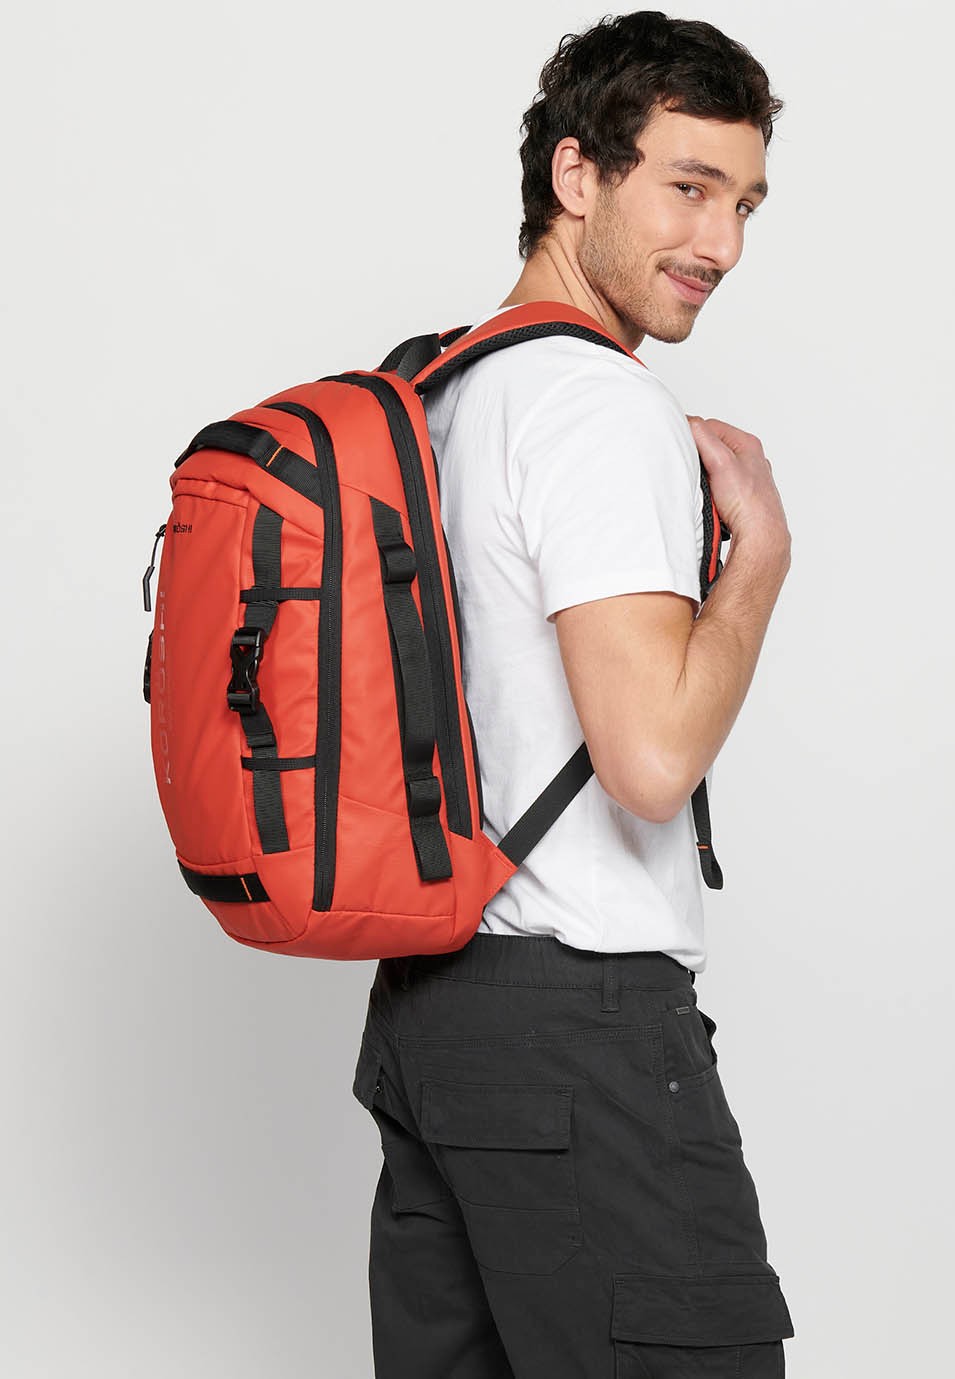 Koröshi backpack with two zippered compartments, one for a laptop and adjustable straps in Red 8